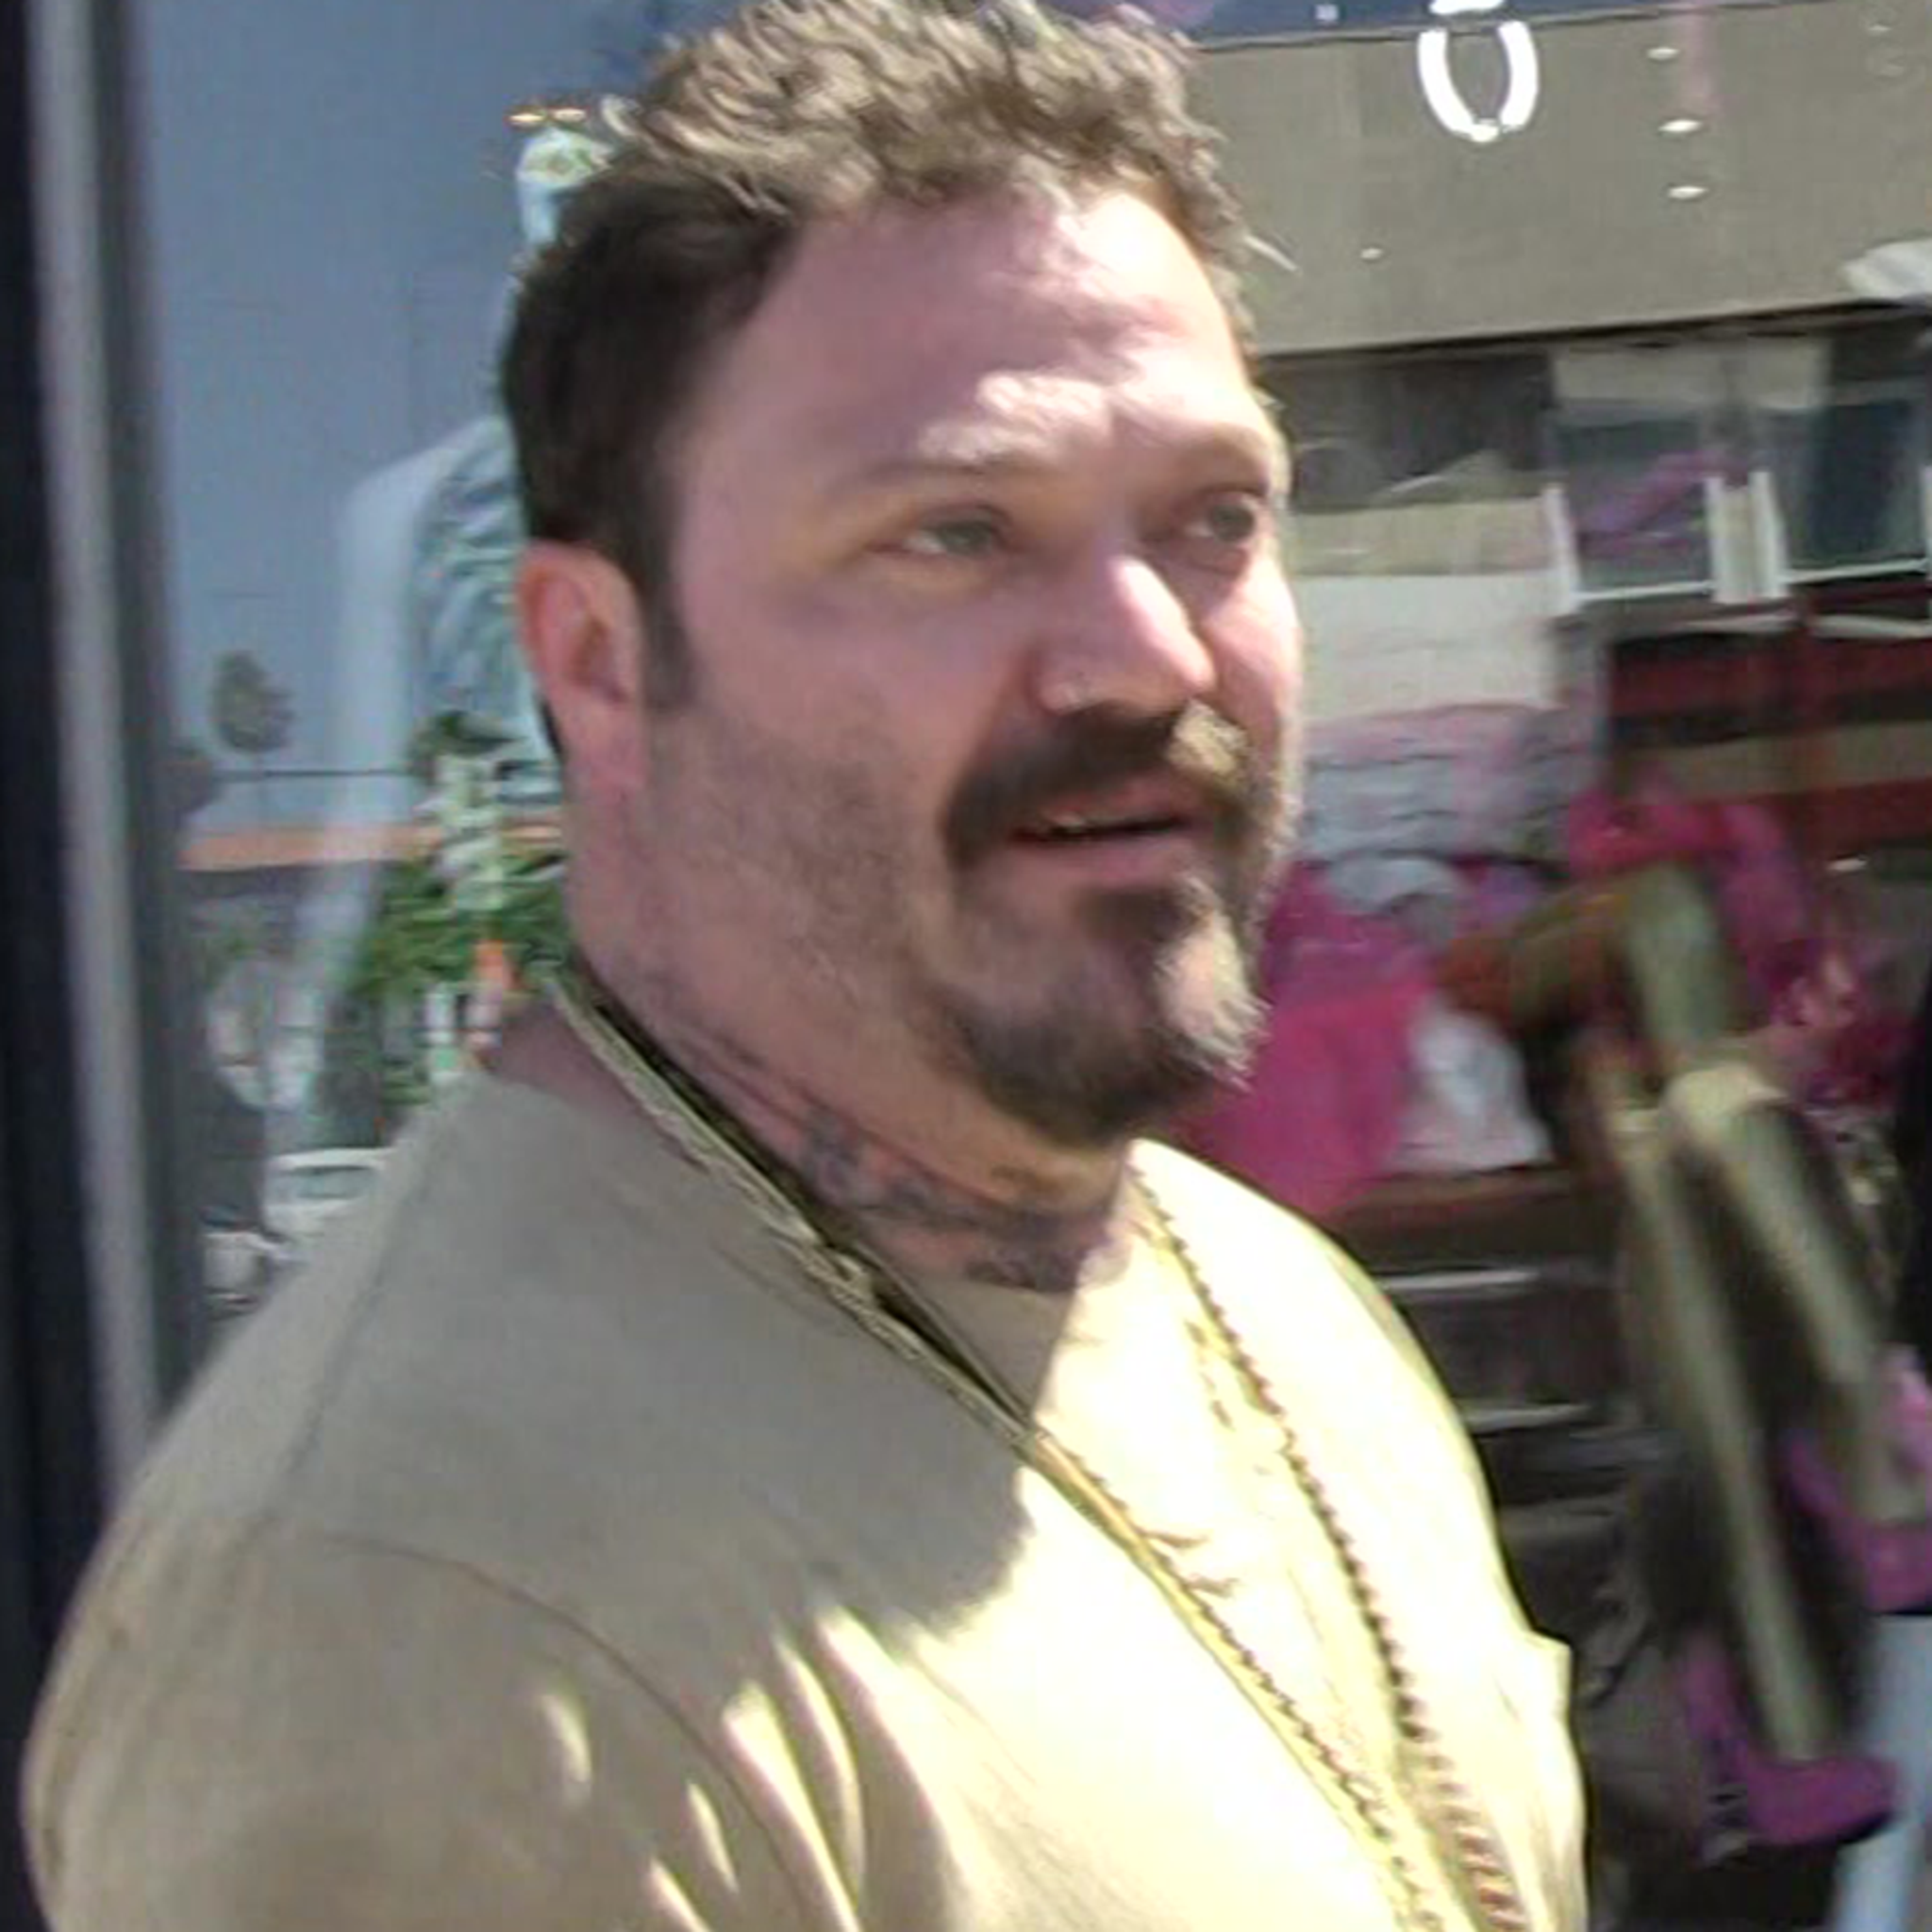 Bam Margera Responds to Restraining Order Taken Out Against